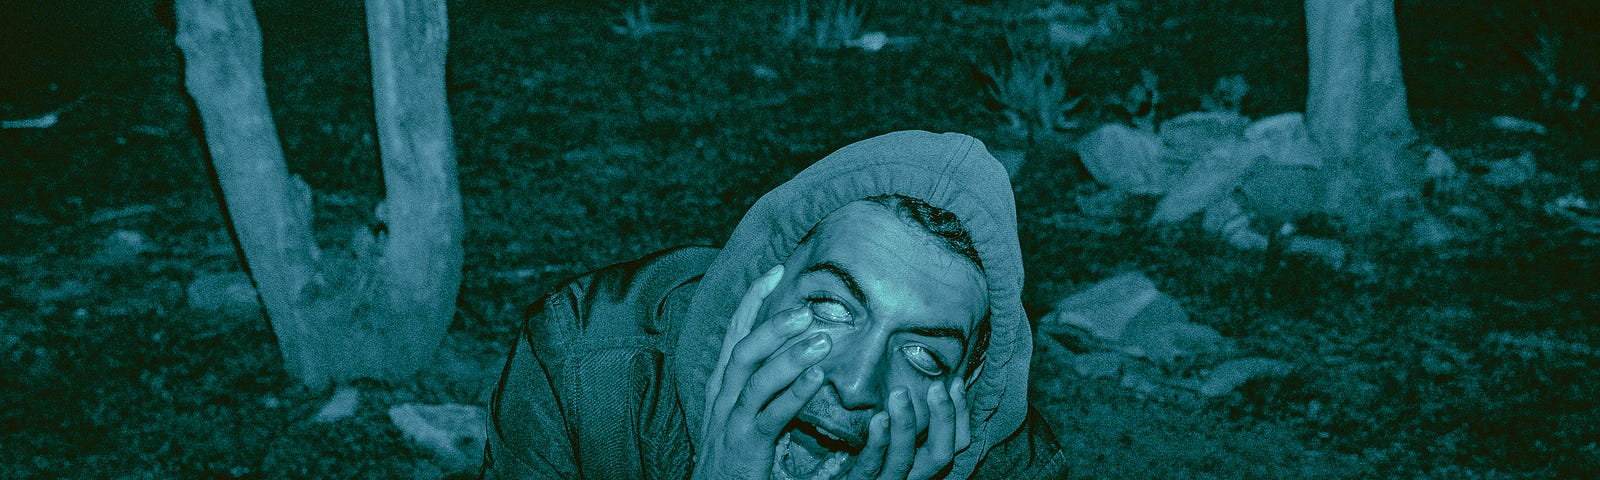 A person with white glazed eyes holding their face and screaming in a dark forest.